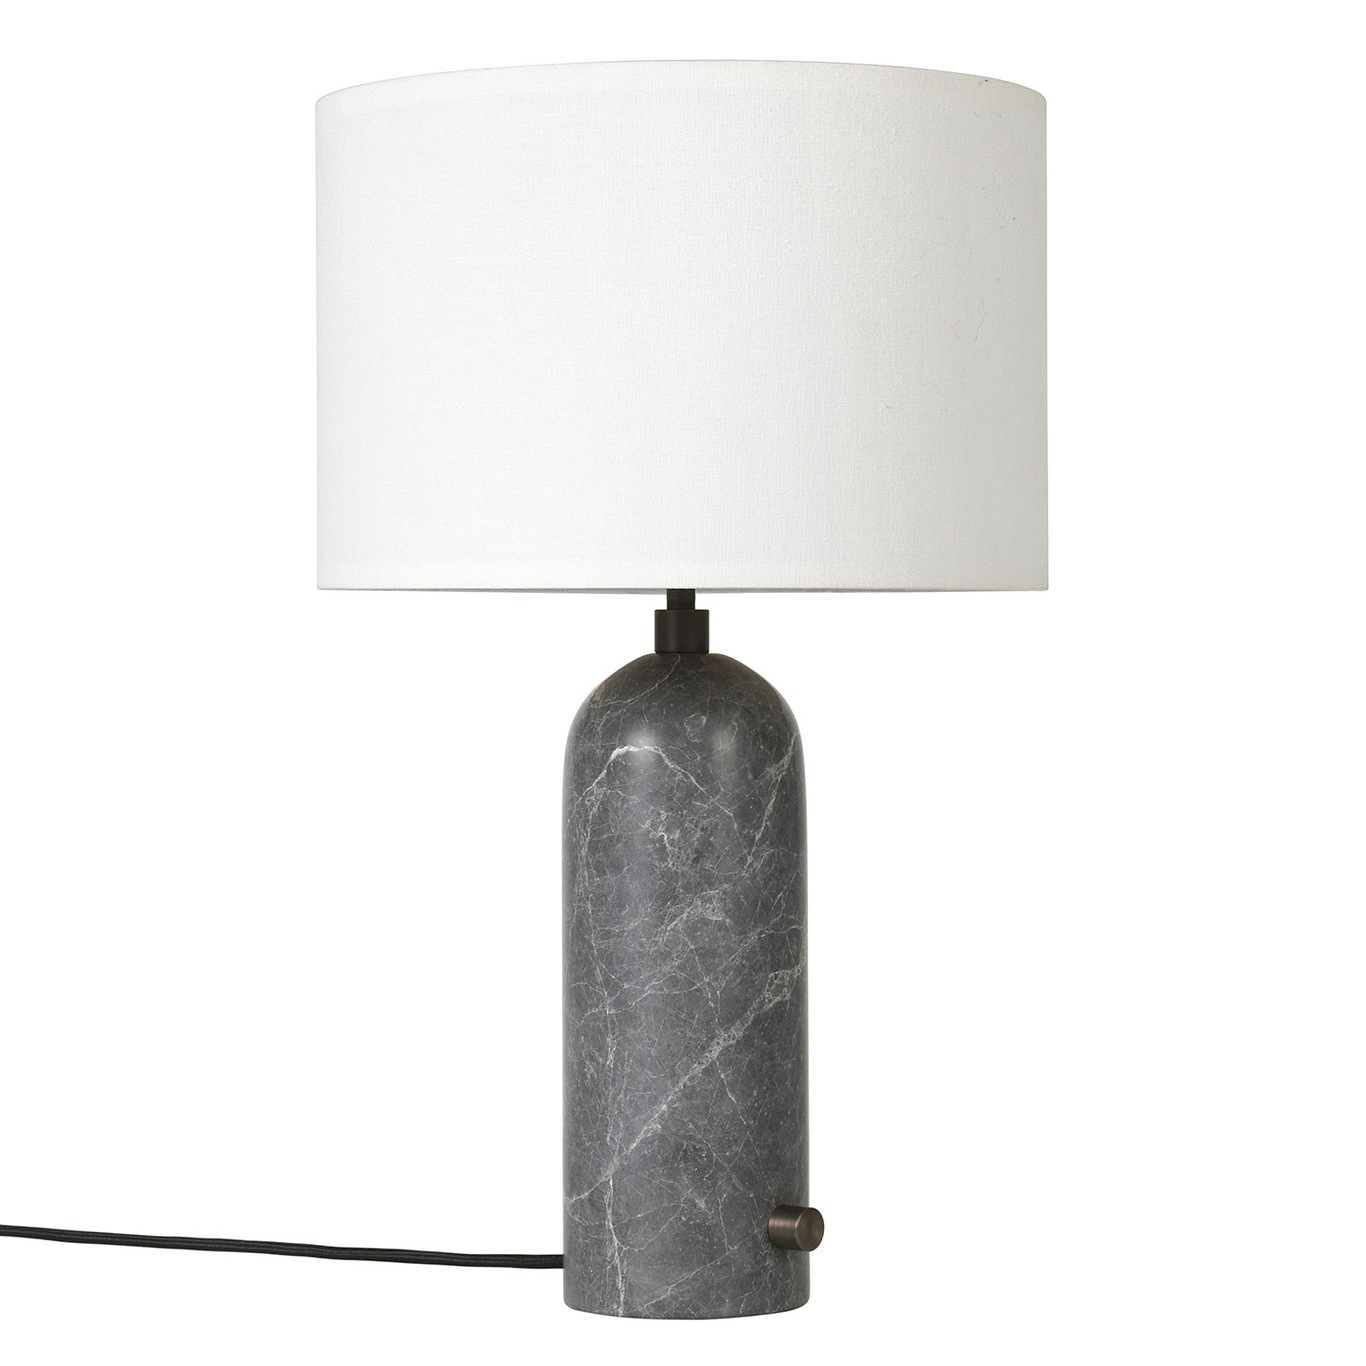 Gravity Table Lamp Small, Grey Marble / White